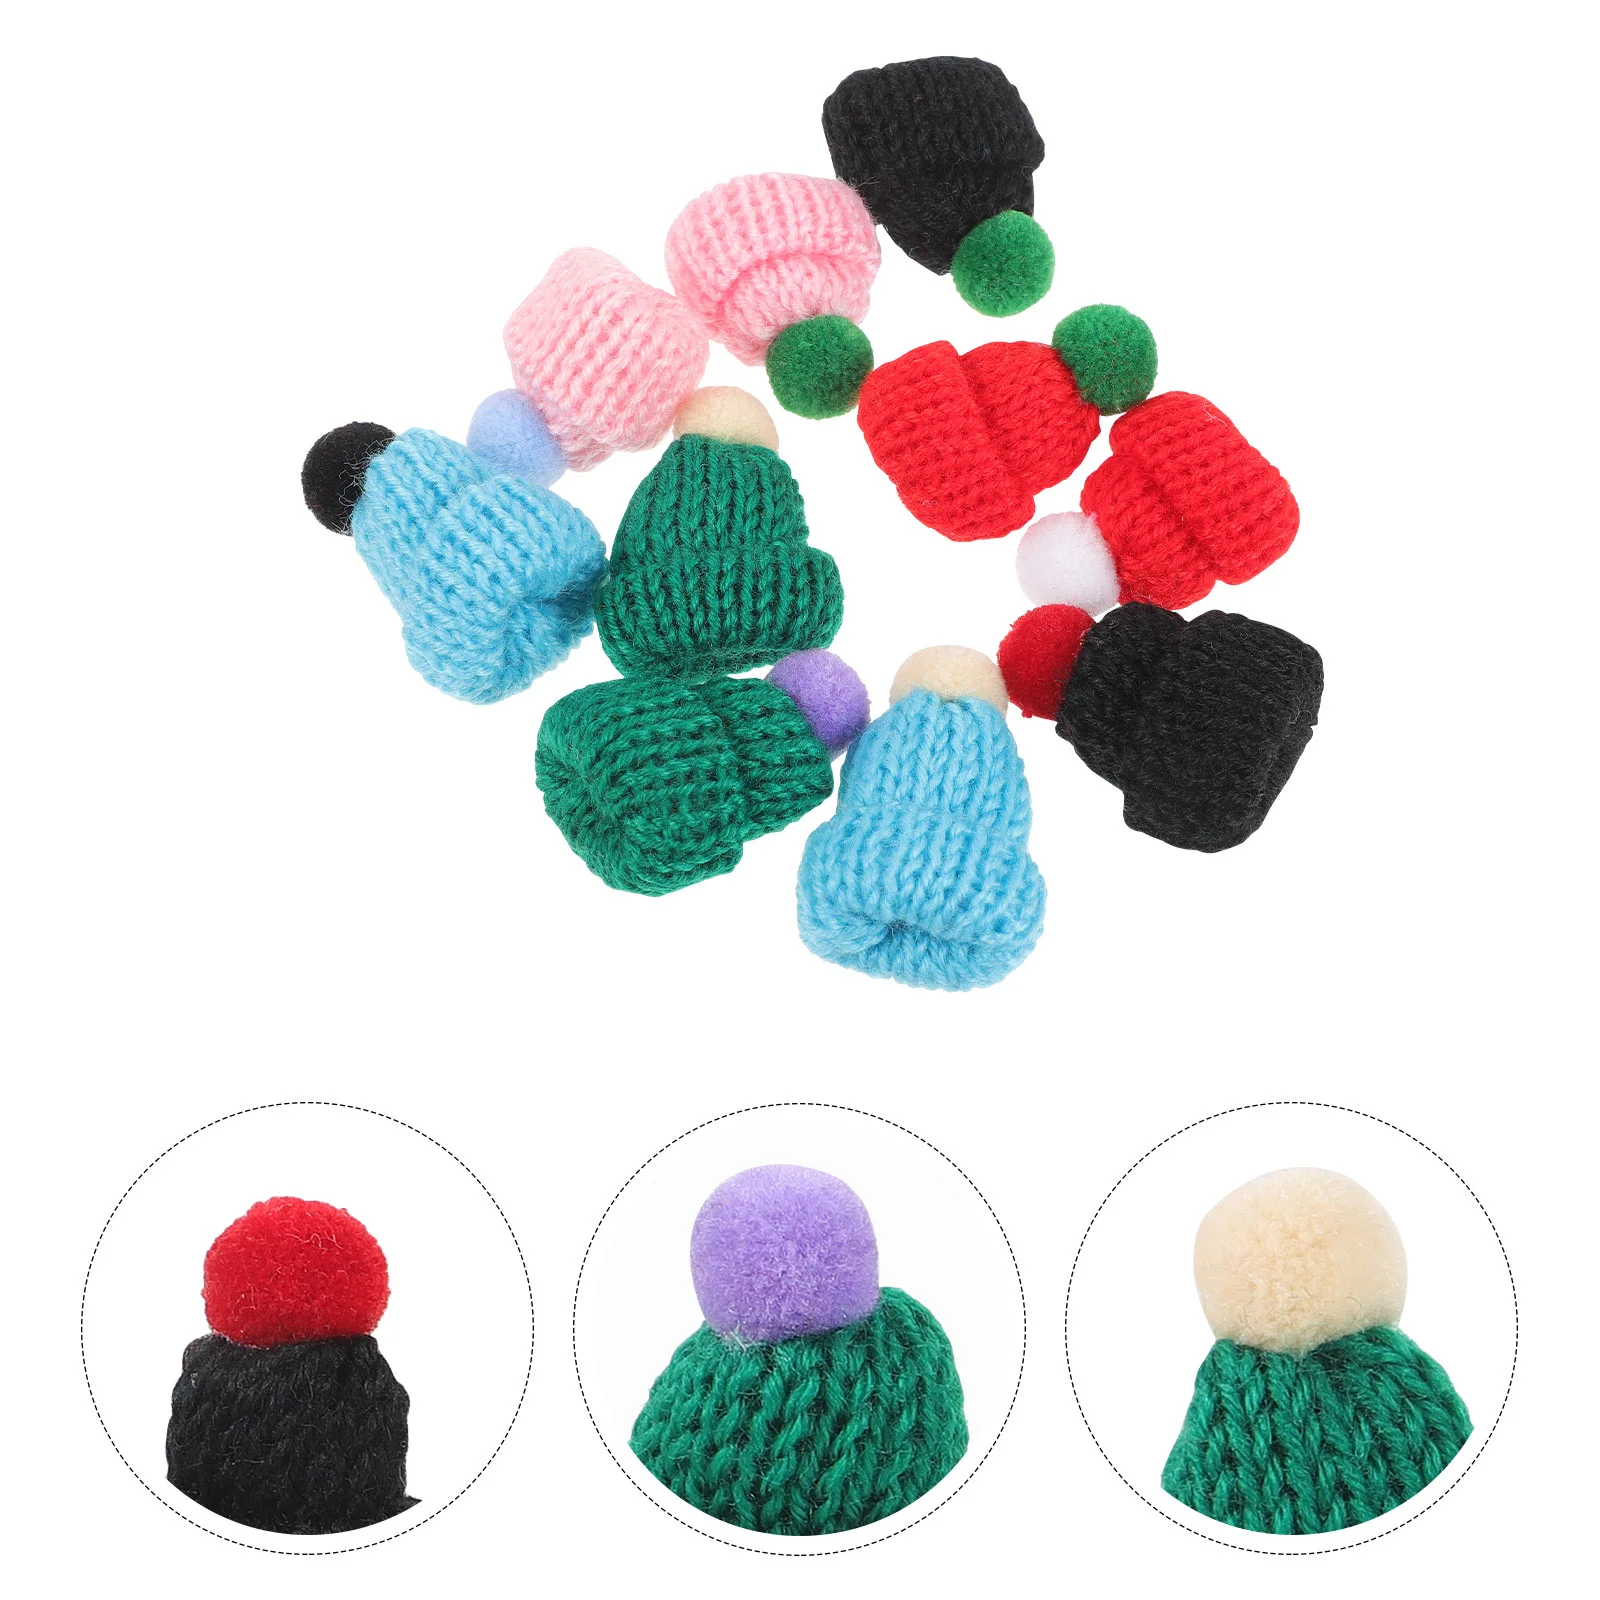 

10pcs DIY Knitting Hats with Pompom Hat Yarn Hat DIY Craft Knitting Decoration Crochet Pompon Small Caps Hats for Craft Jewelry